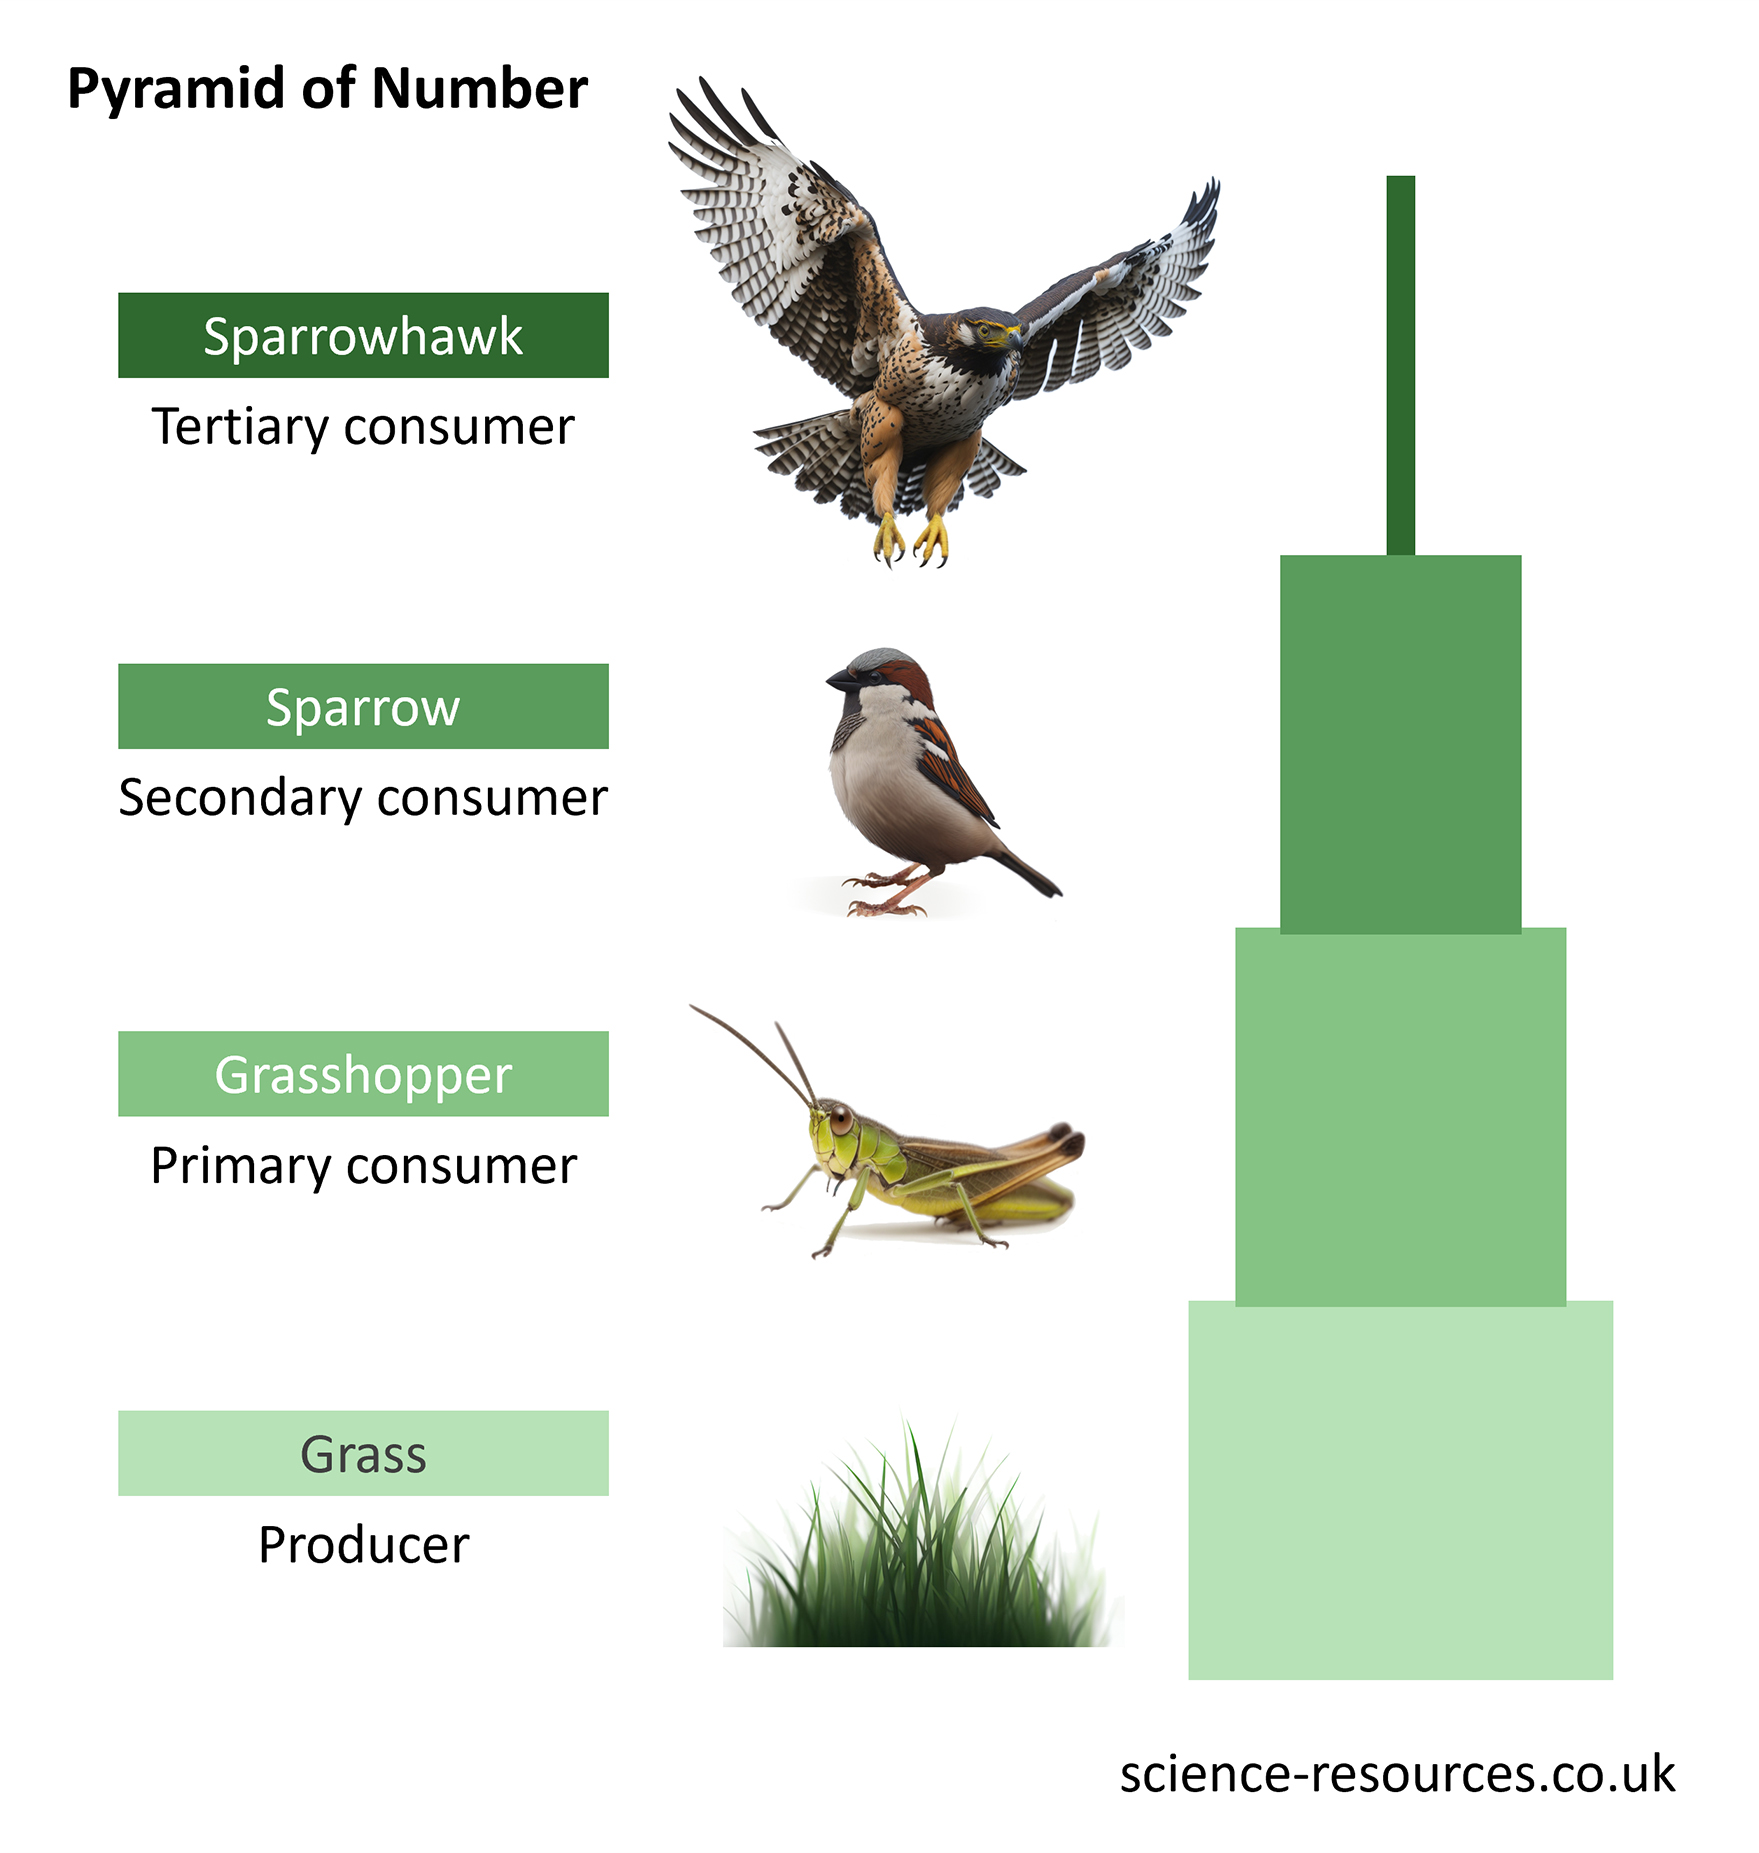 This image is a diagram representing a Pyramid of Number in an ecosystem. It illustrates the number of organisms at each trophic level, with grass as the producer at the base, followed by primary, secondary, and tertiary consumers represented by a grasshopper, sparrow, and sparrowhawk respectively. 